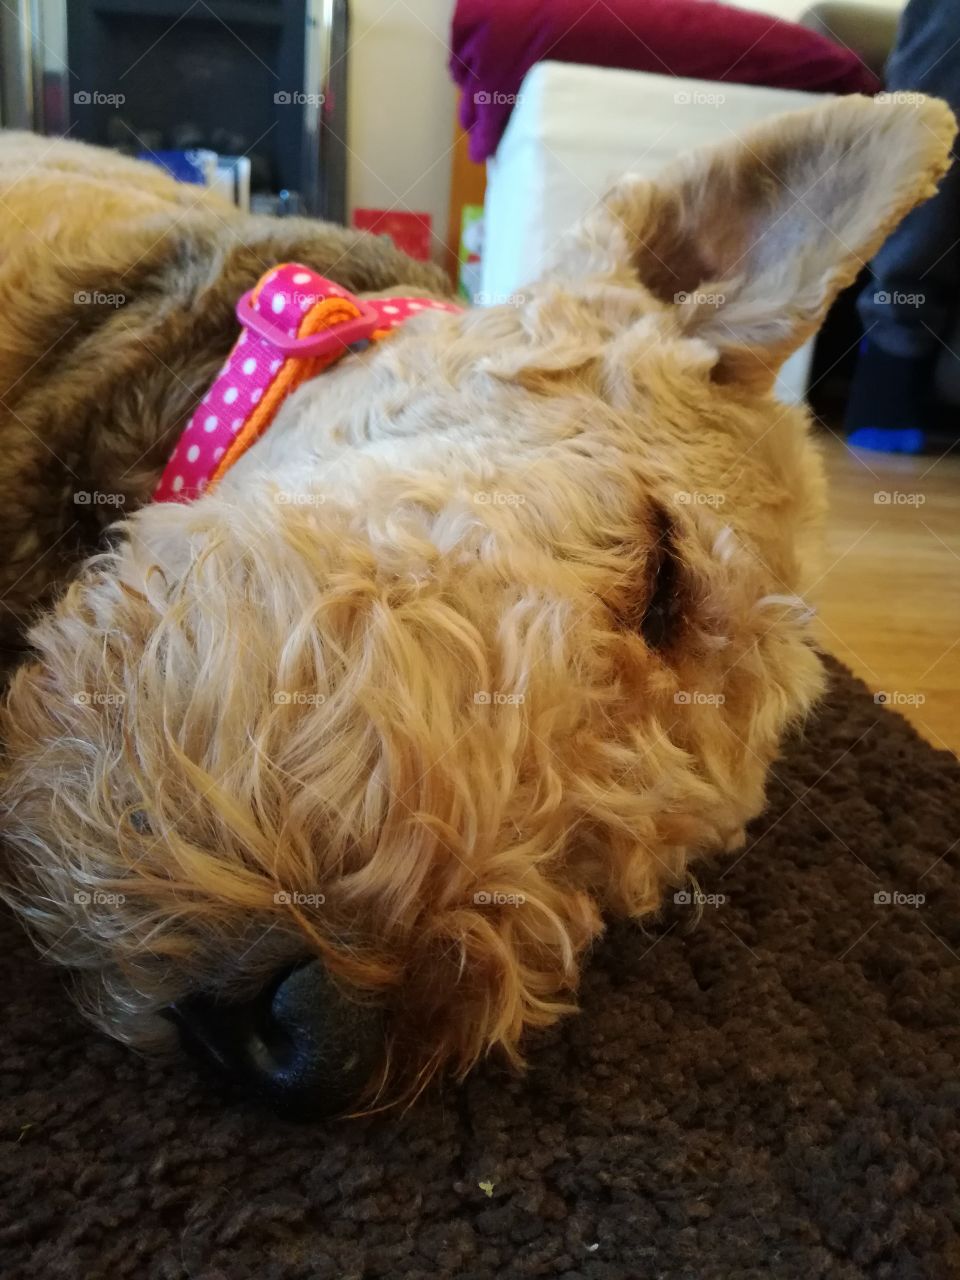 A close-up of a cute, sleeping Airedale Terrier.